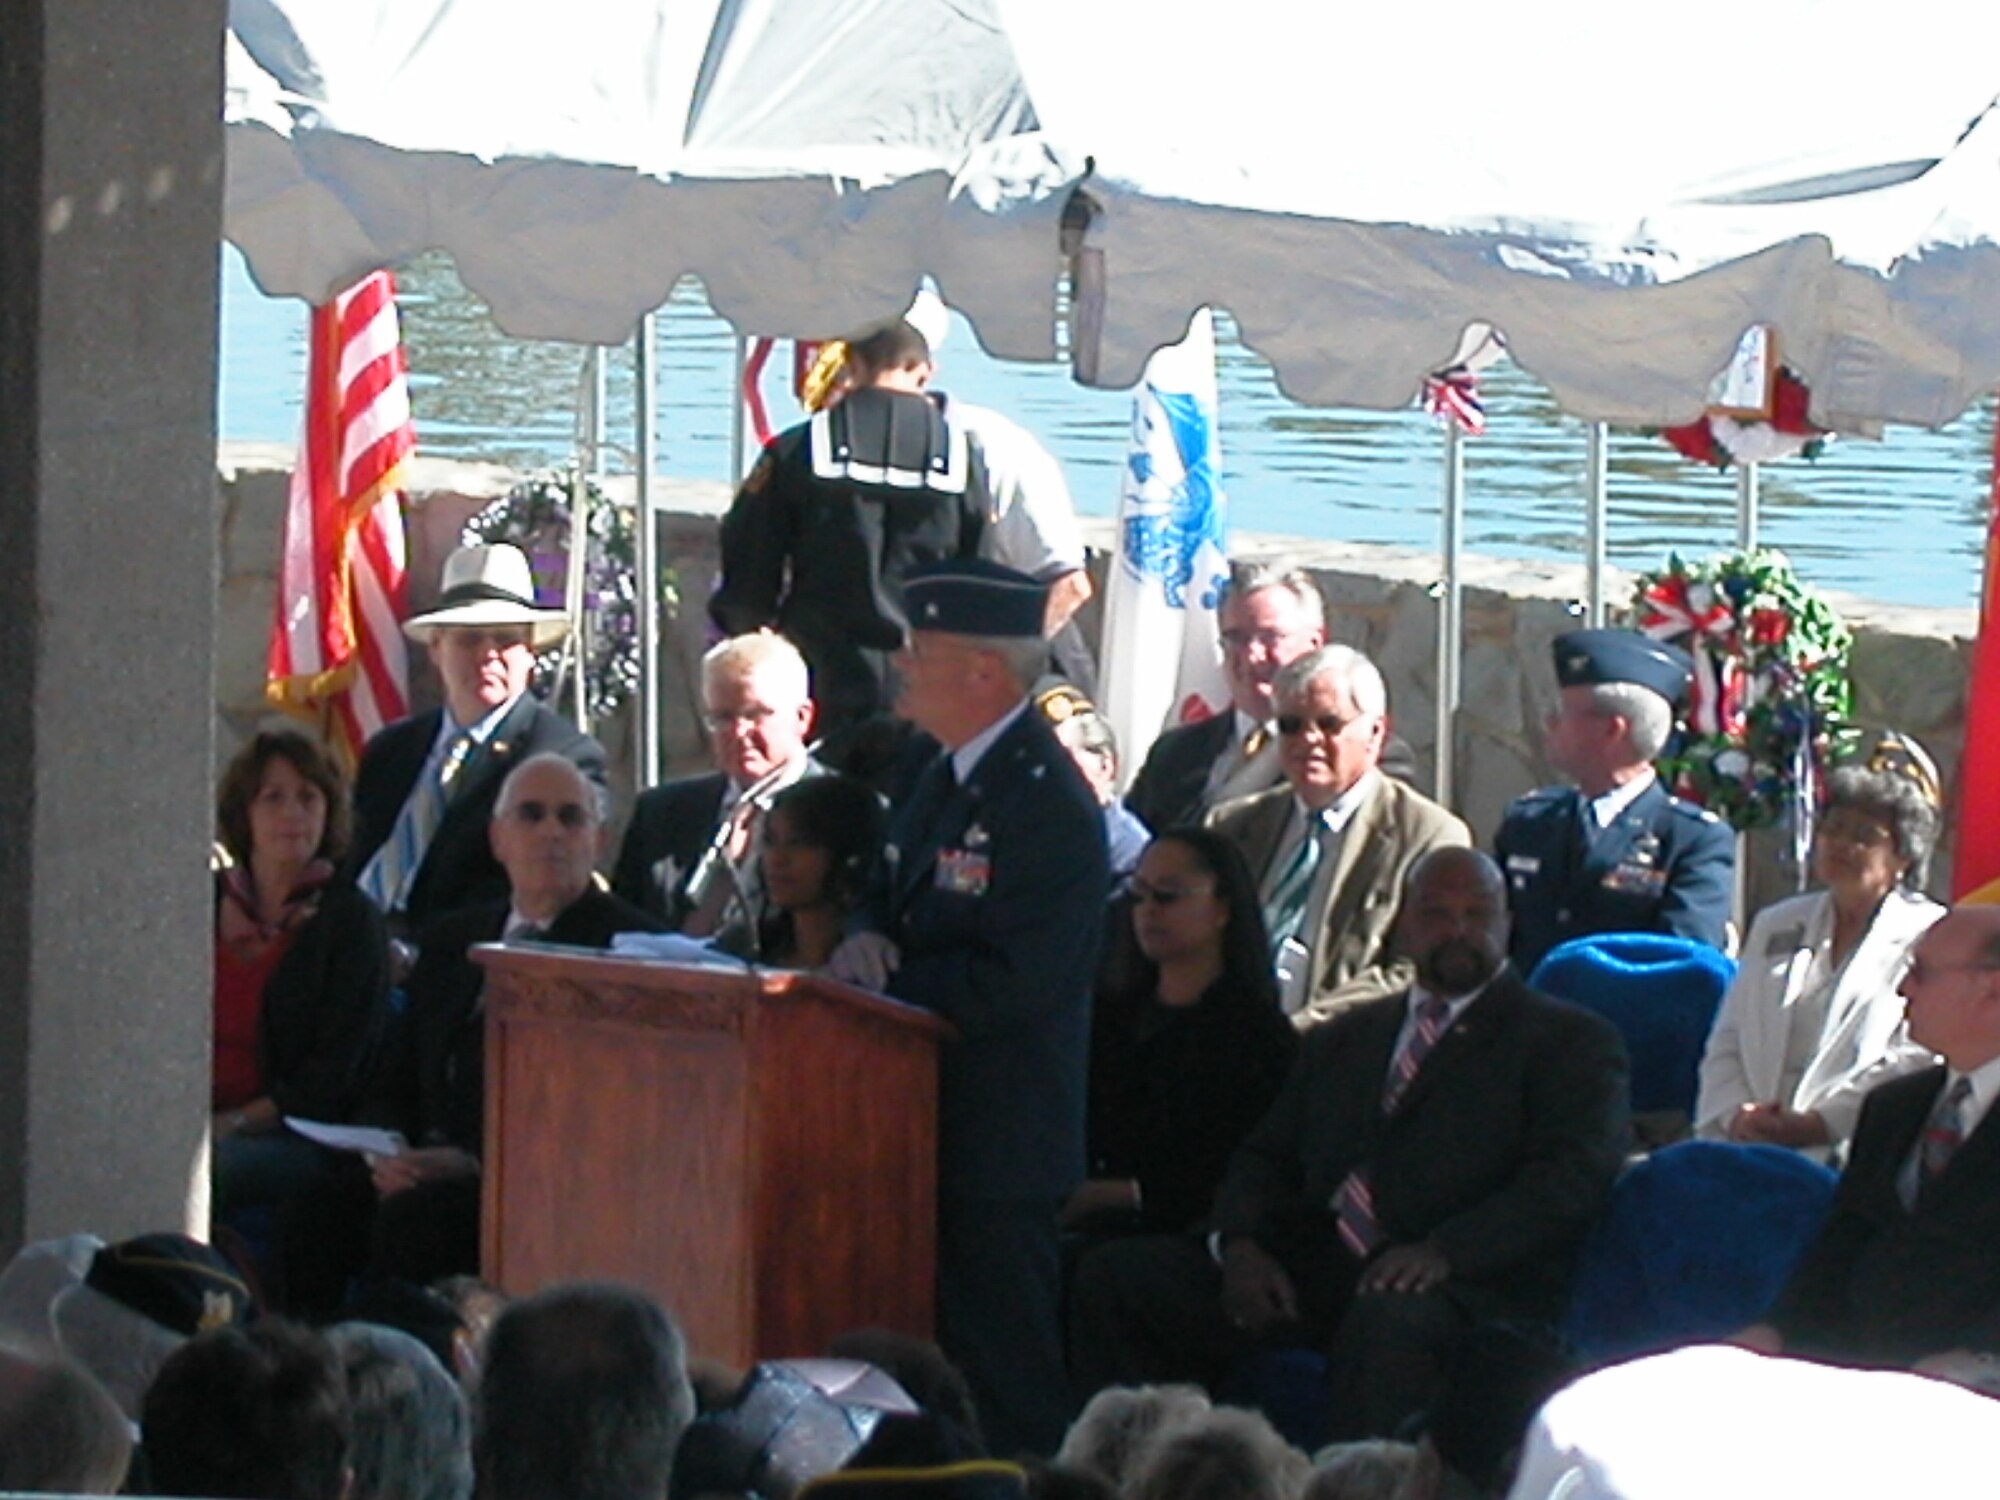 Brig. Gen. James Melin, 452 AMW commander, was the keynote speaker at the Veterans Day ceremony held at the Riverside National Cemetery. Some 2,500 people attended the event which featured a flyover of a March C-17. Local elected officials, military commanders and veterans and their families were present. The Riverside Concert Band played each of the service songs and the cemetery’s Memorial Honor Detail provided the colors and rifle salute. (U.S. Air Force photo by Maj. Don Traud)